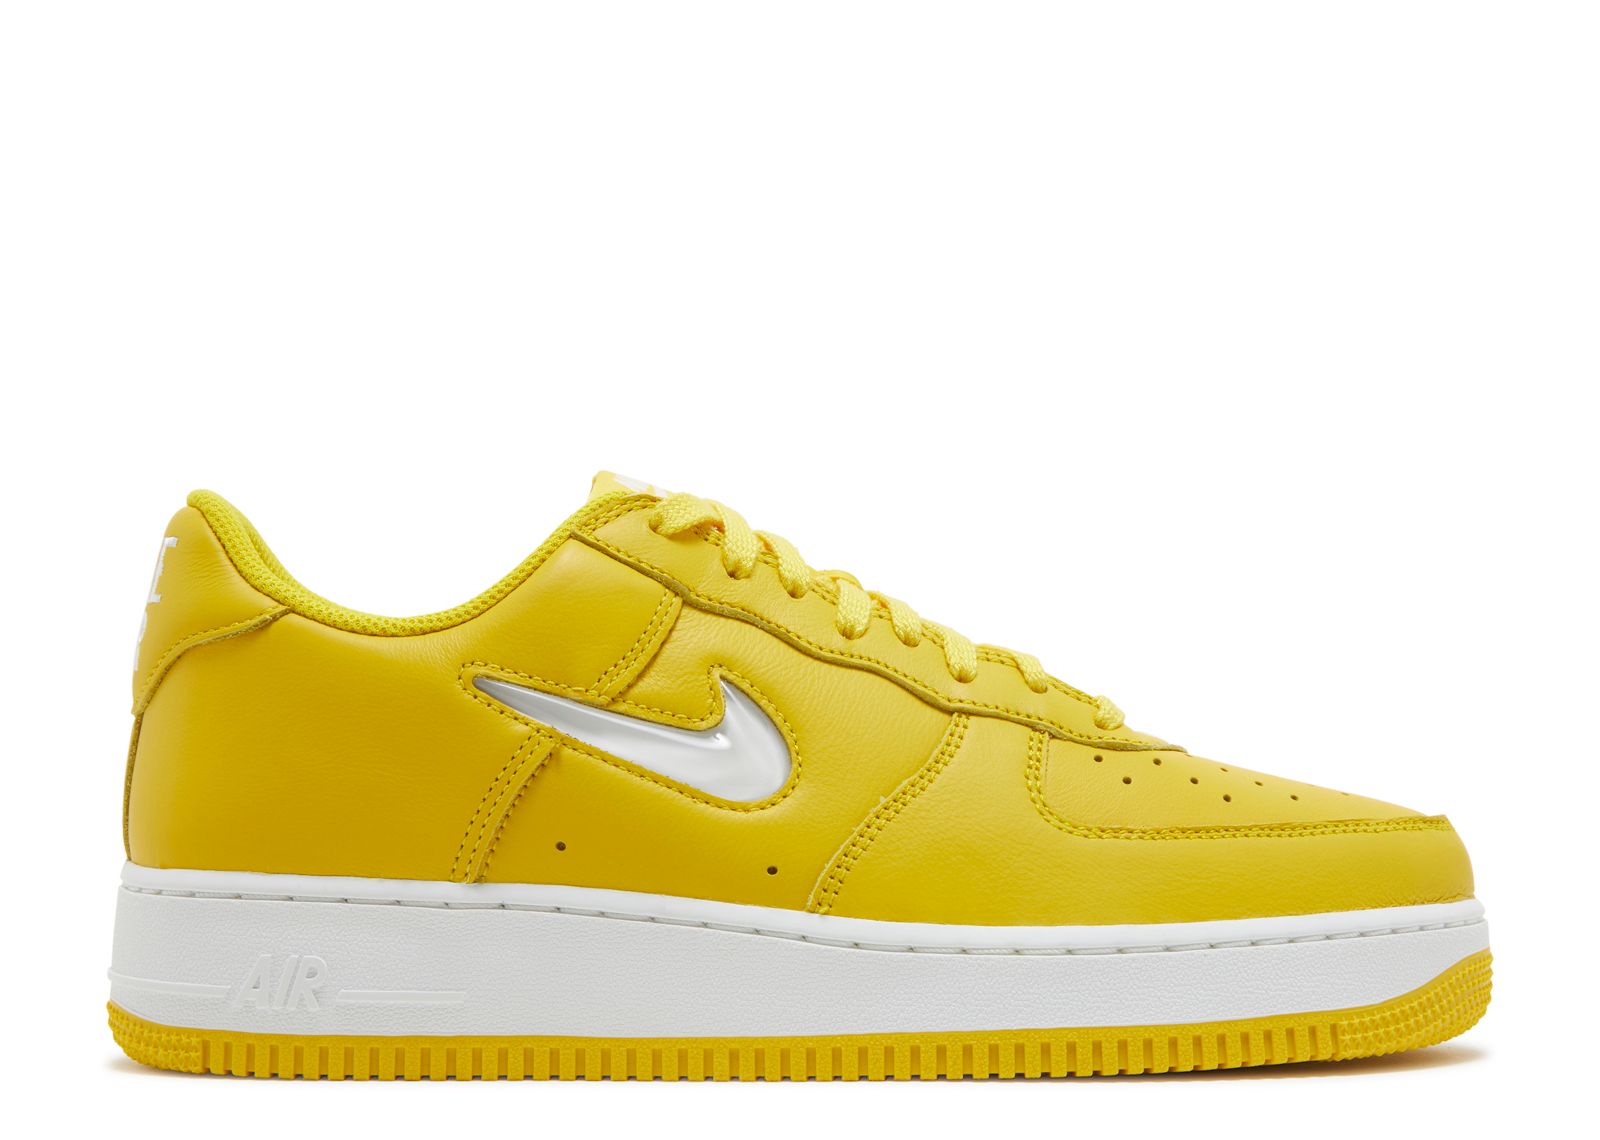 Air Force 1 Jewel 'Color Of The Month Yellow' - Nike - FJ1044 700 ...